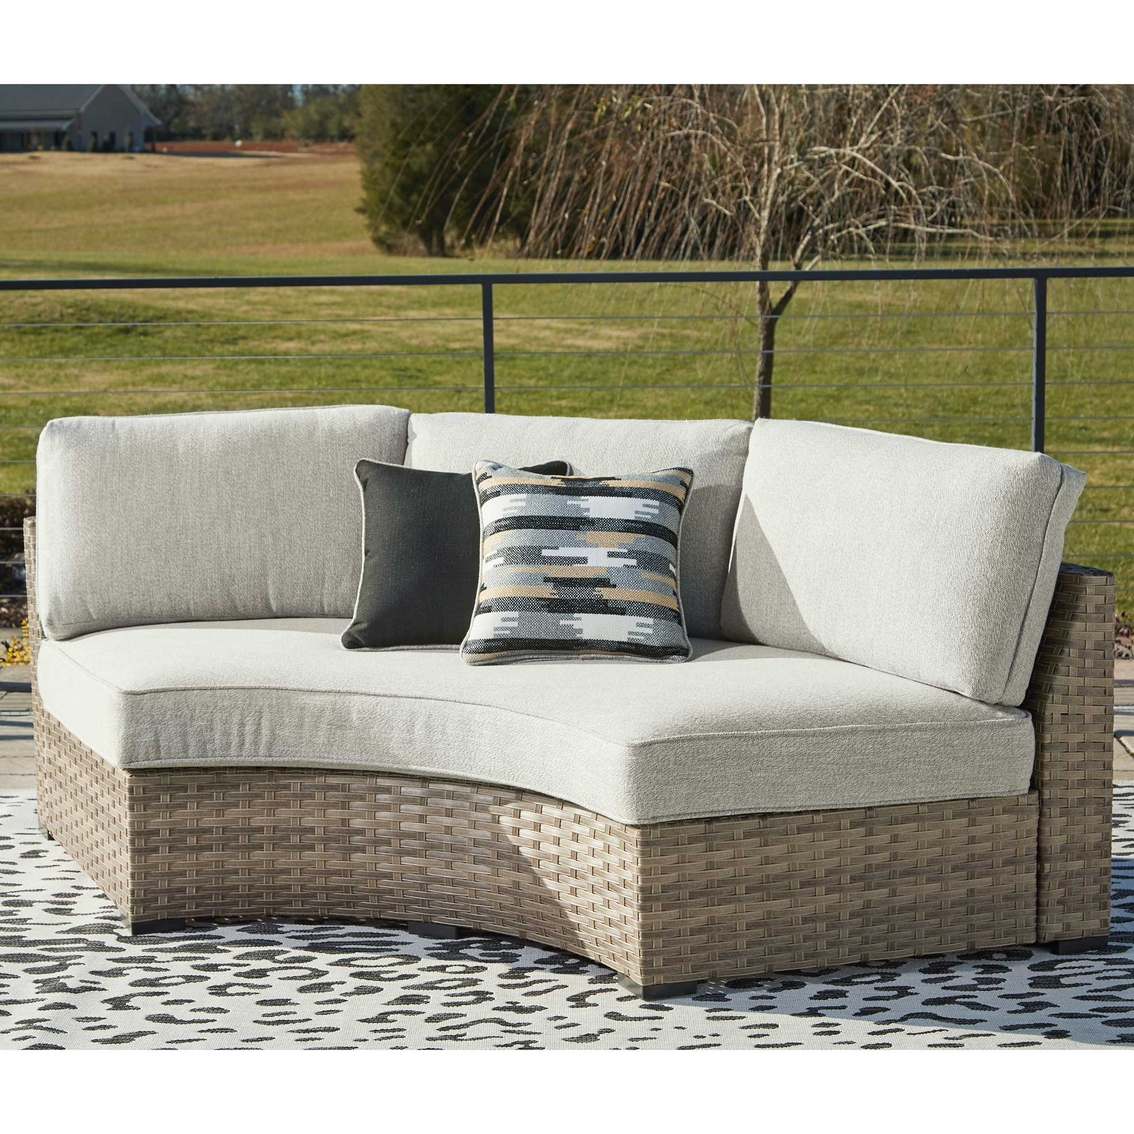 Signature Design by Ashley Calworth 9 pc. Outdoor Set - Image 4 of 5